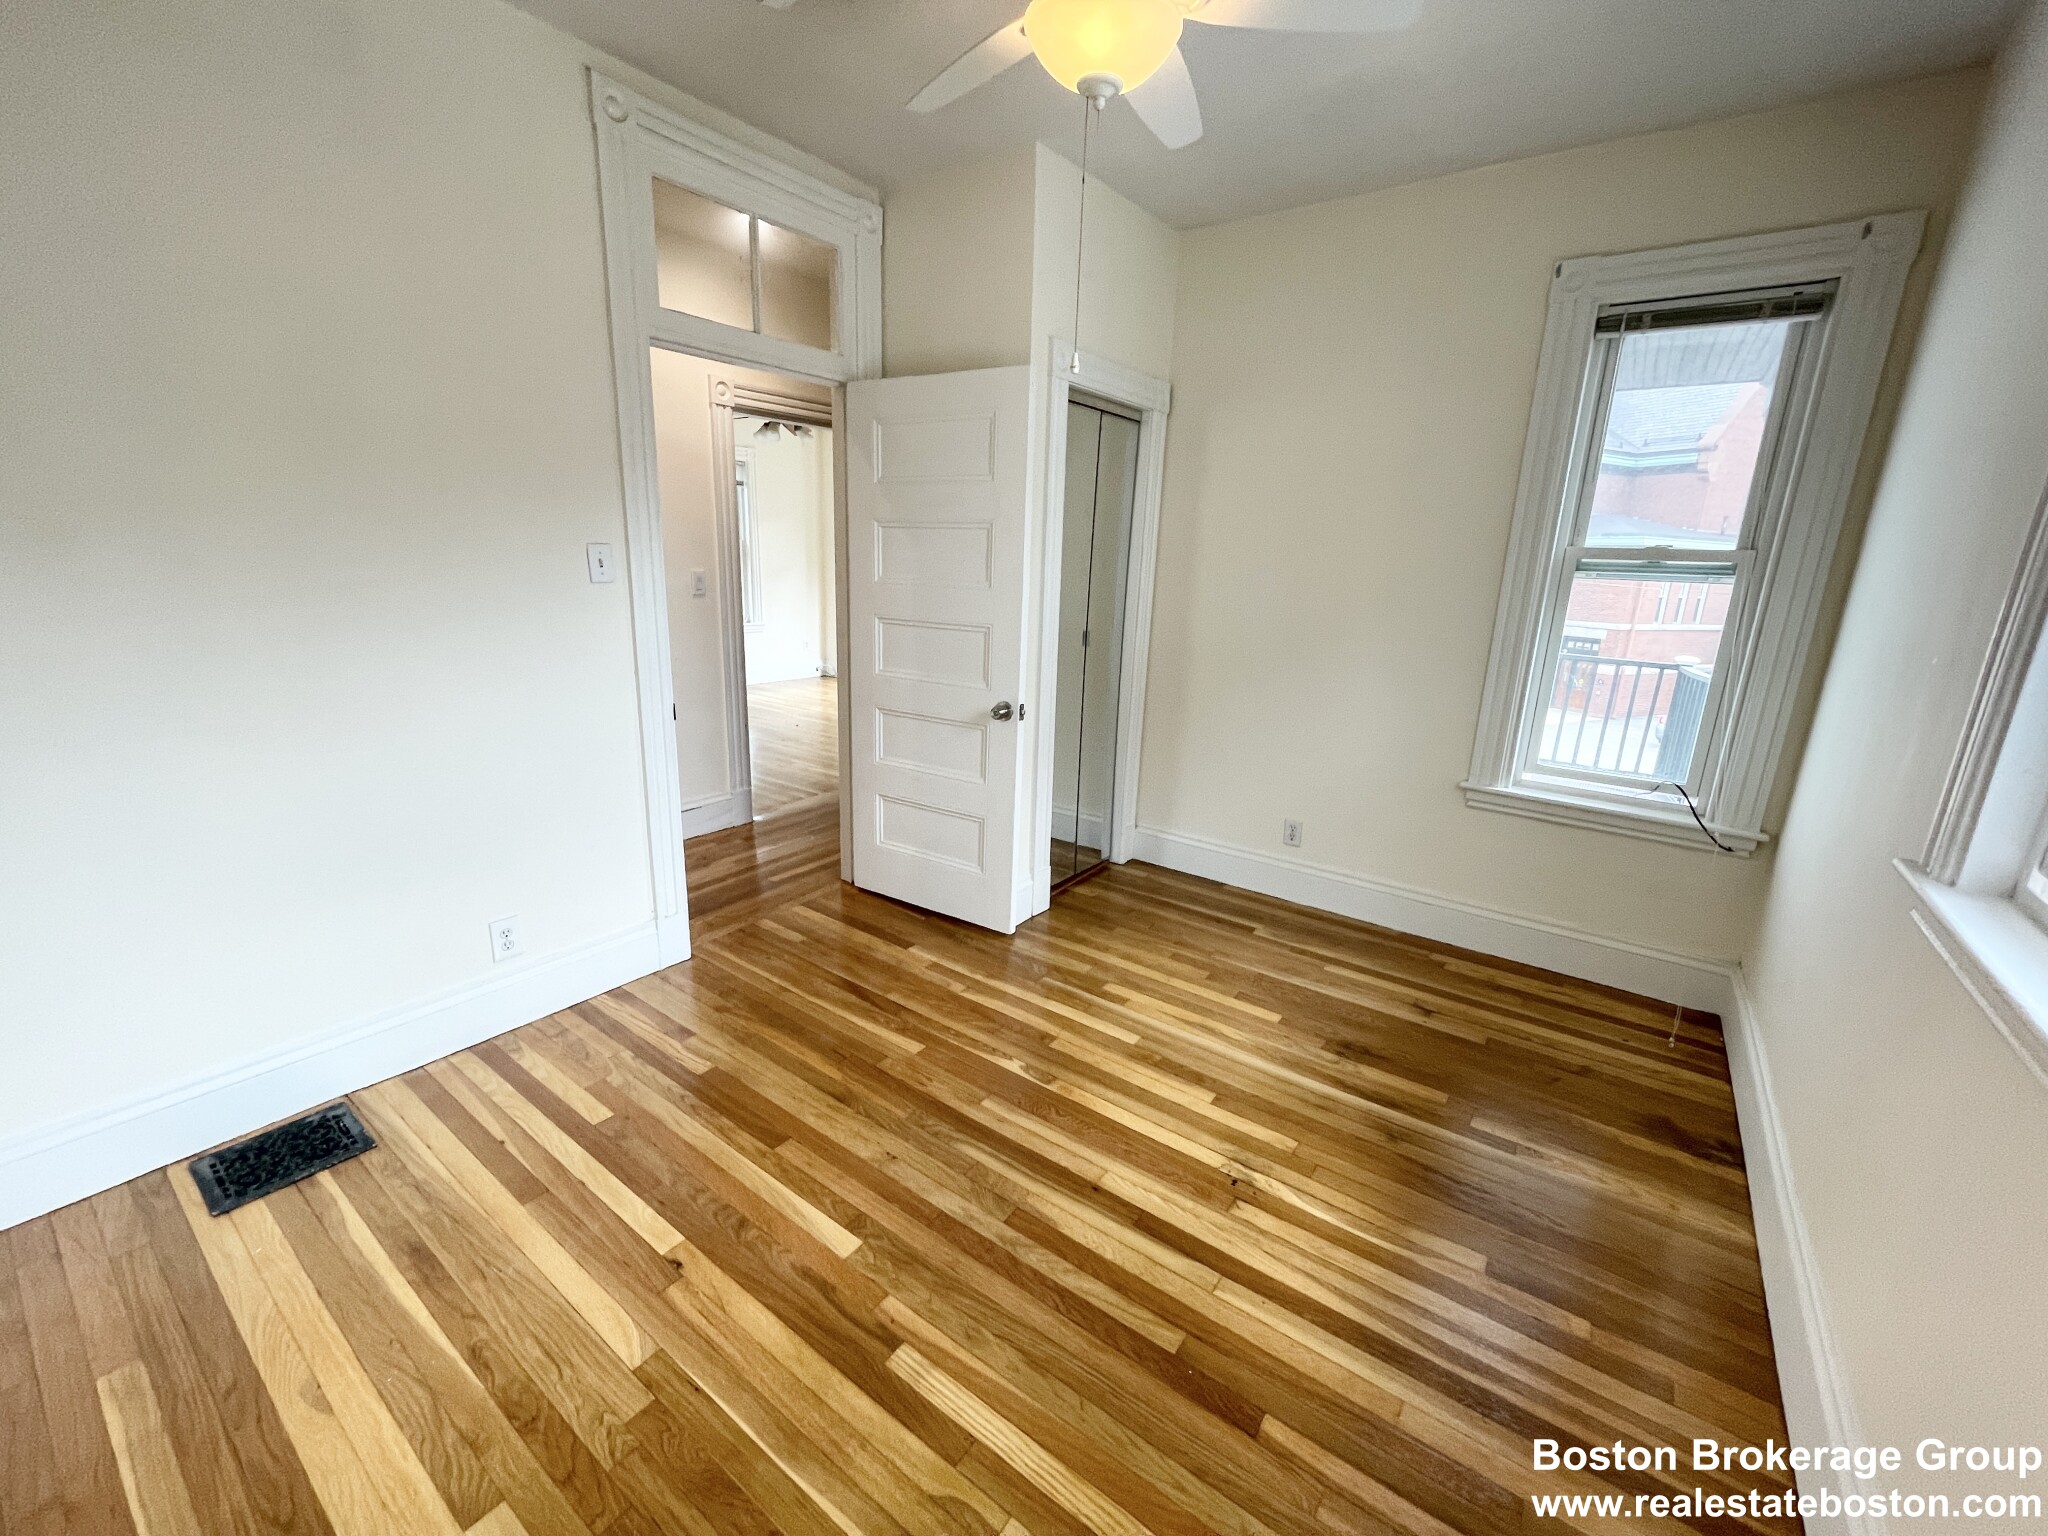 Photos of apartment on Roseclair St.,Boston MA 02125